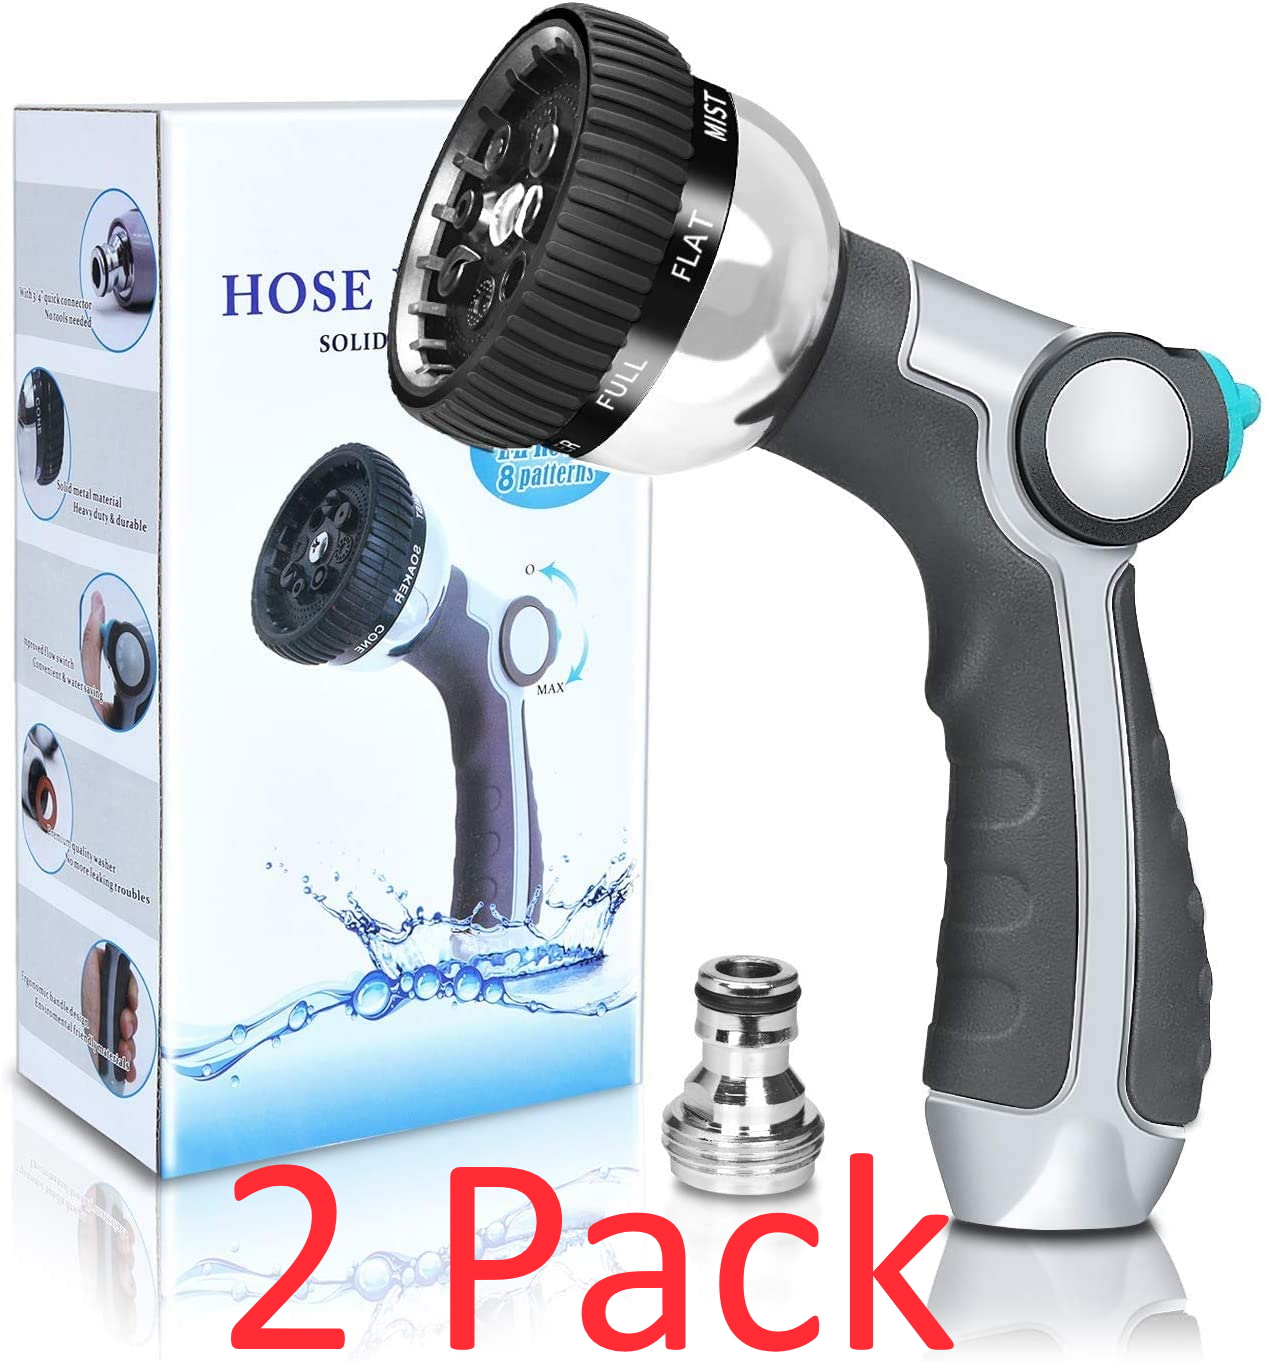 TopSource Garden Hose Nozzle with 8 Patterns, Metal Water Hose Nozzle Anti-Leak, Heavy Duty Spray Nozzle High Pressure, Thumb Control Nozzle - image 1 of 7